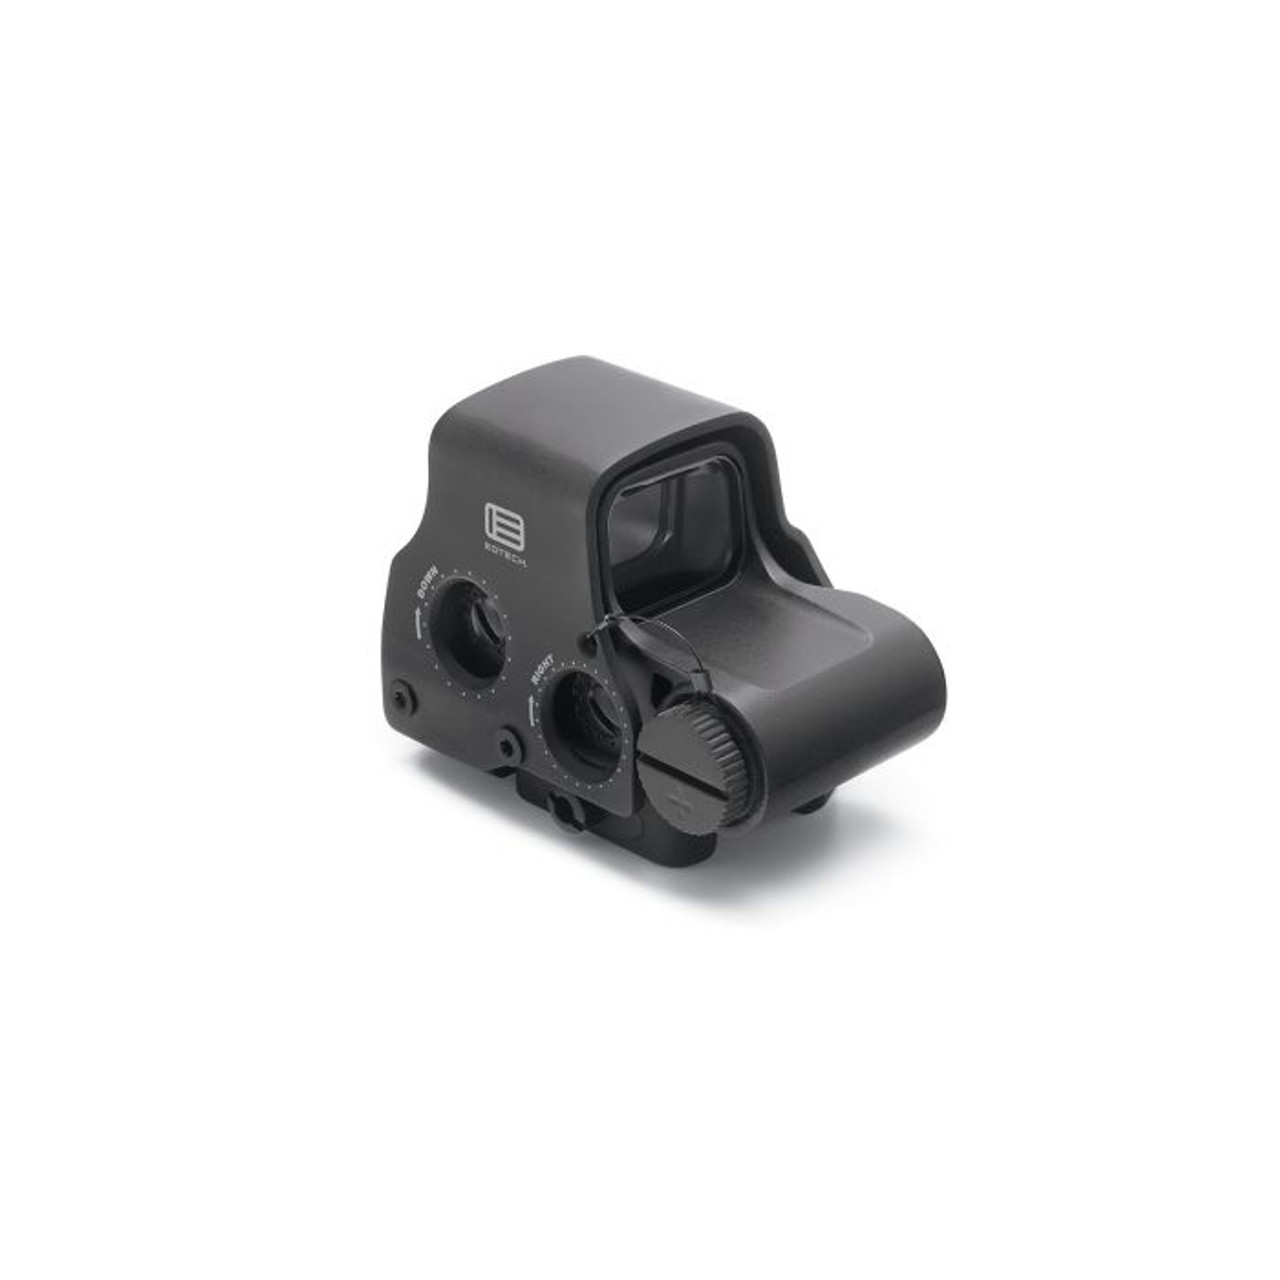 EXPS2-0GRN Holographic Weapon Sight